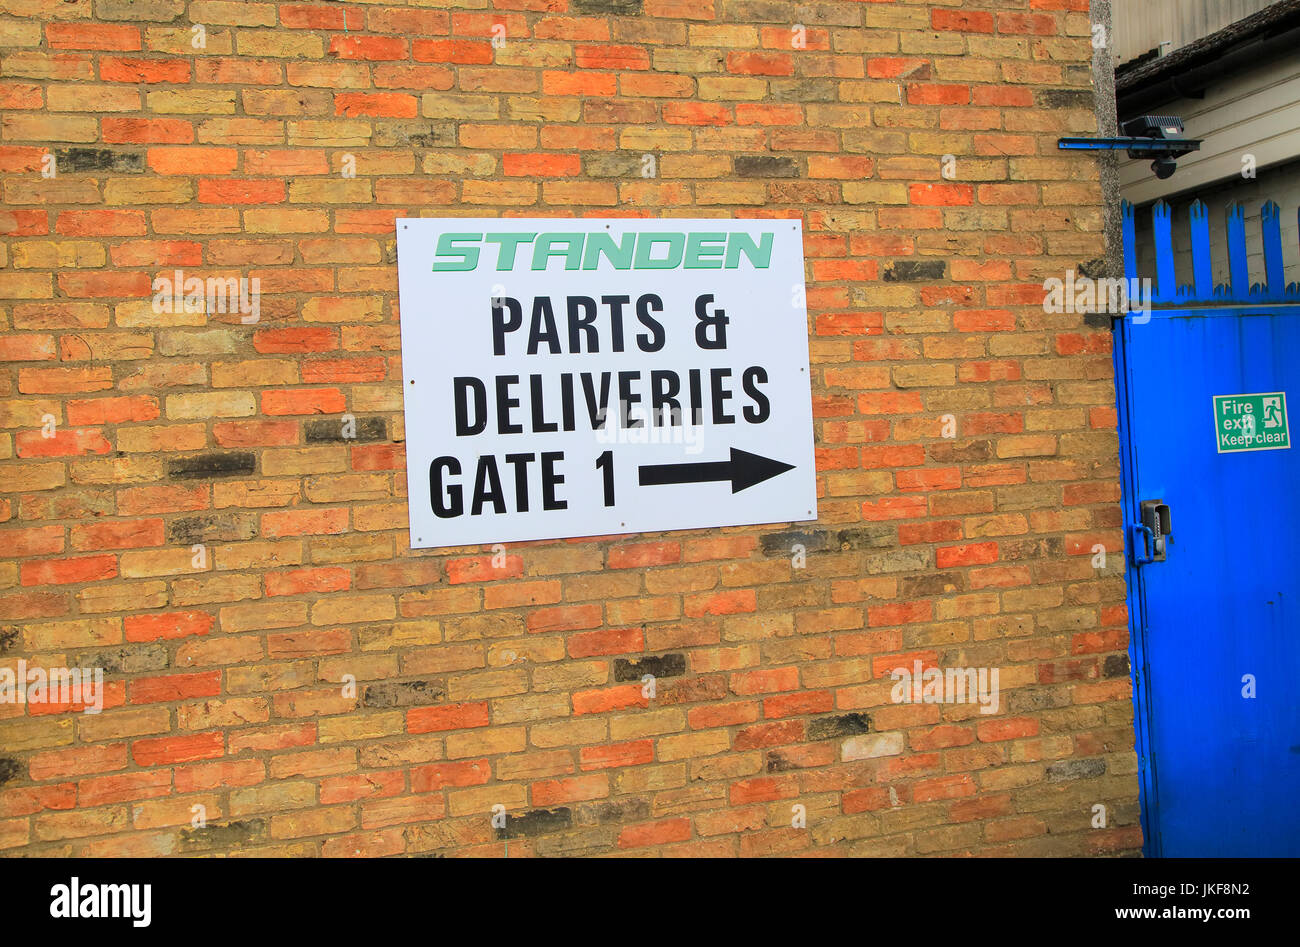 Standen agricultural engineering Parts and Deliveries sign, Ely, Cambridgeshire, England, UK Stock Photo